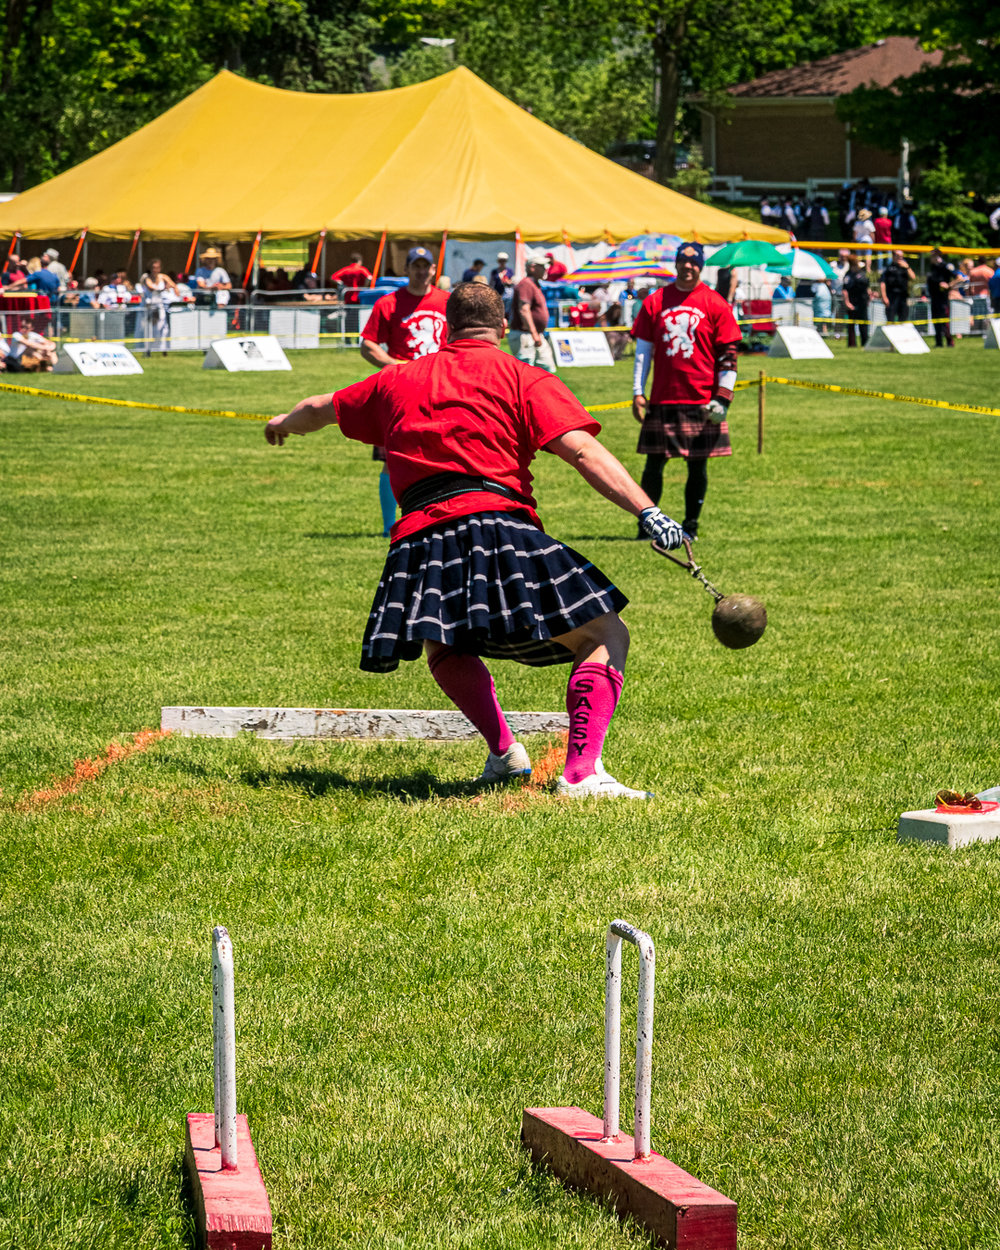 Georgetown Highland Games - Heavies Competitors